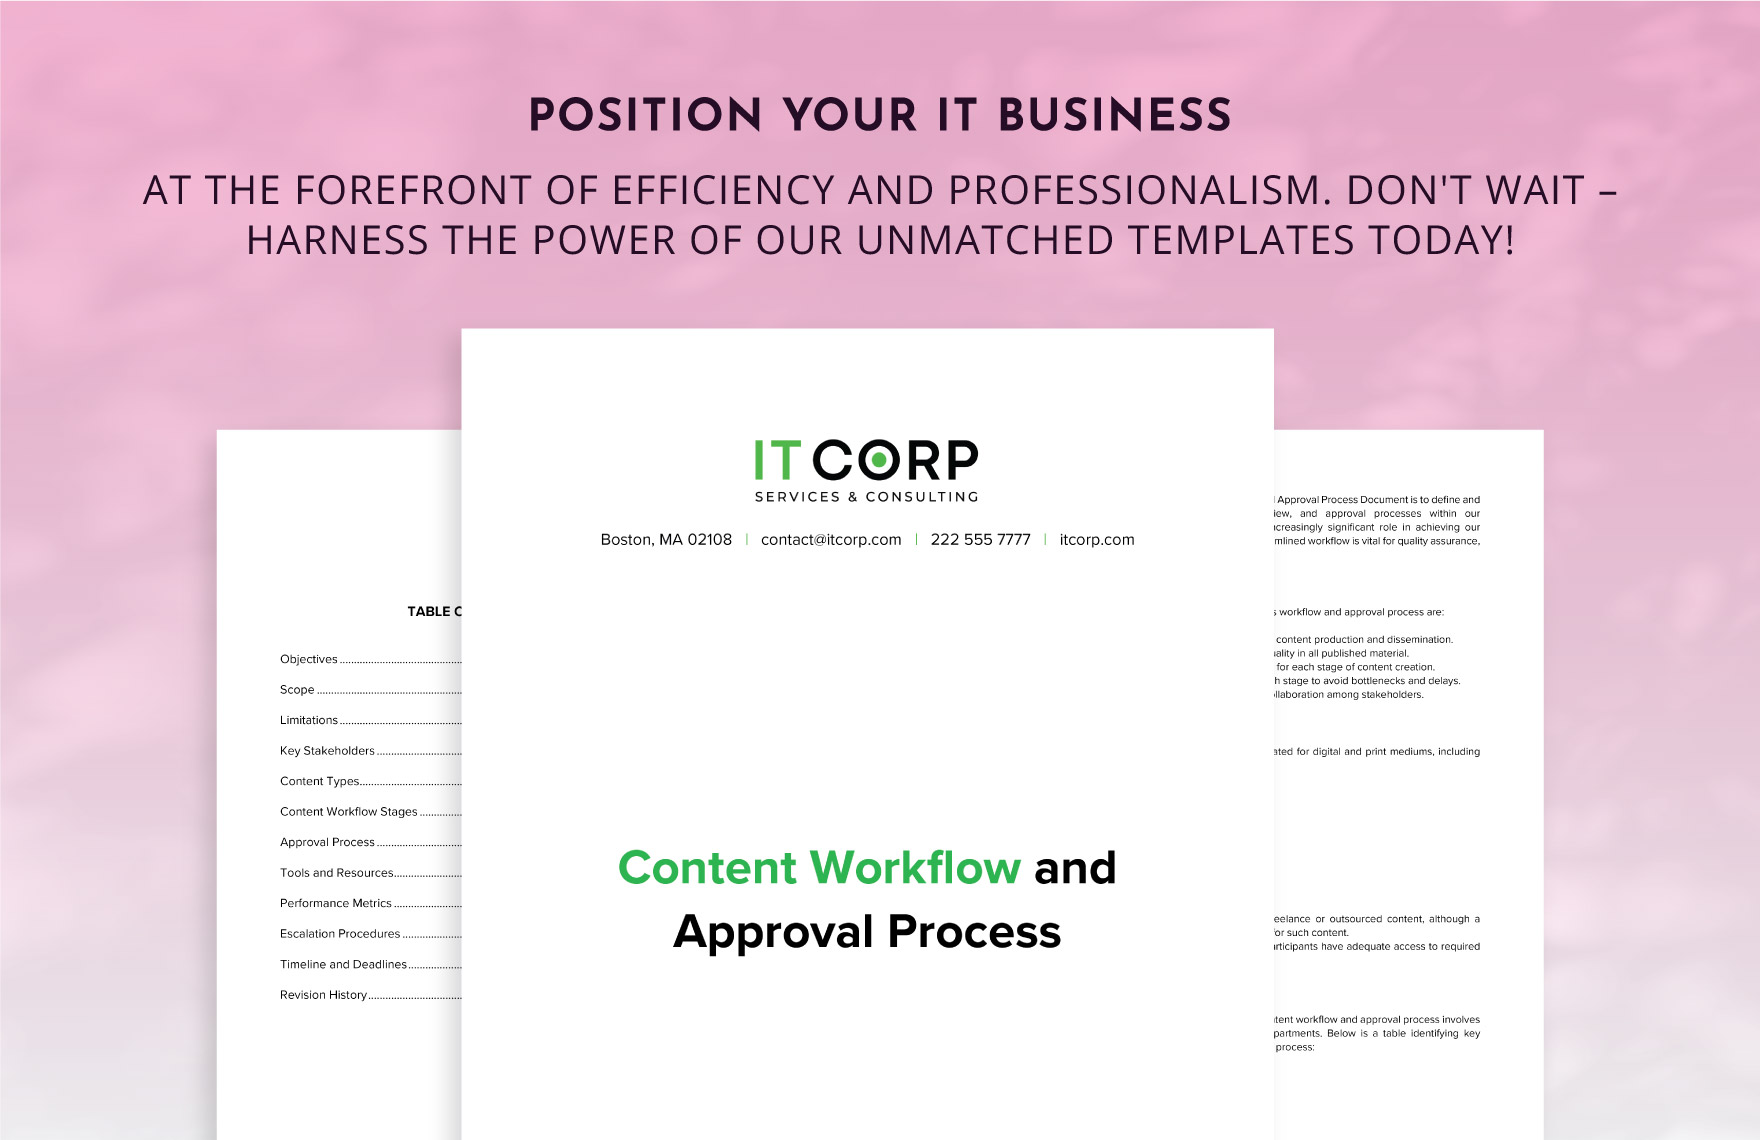 Content Workflow and Approval Process Document Template